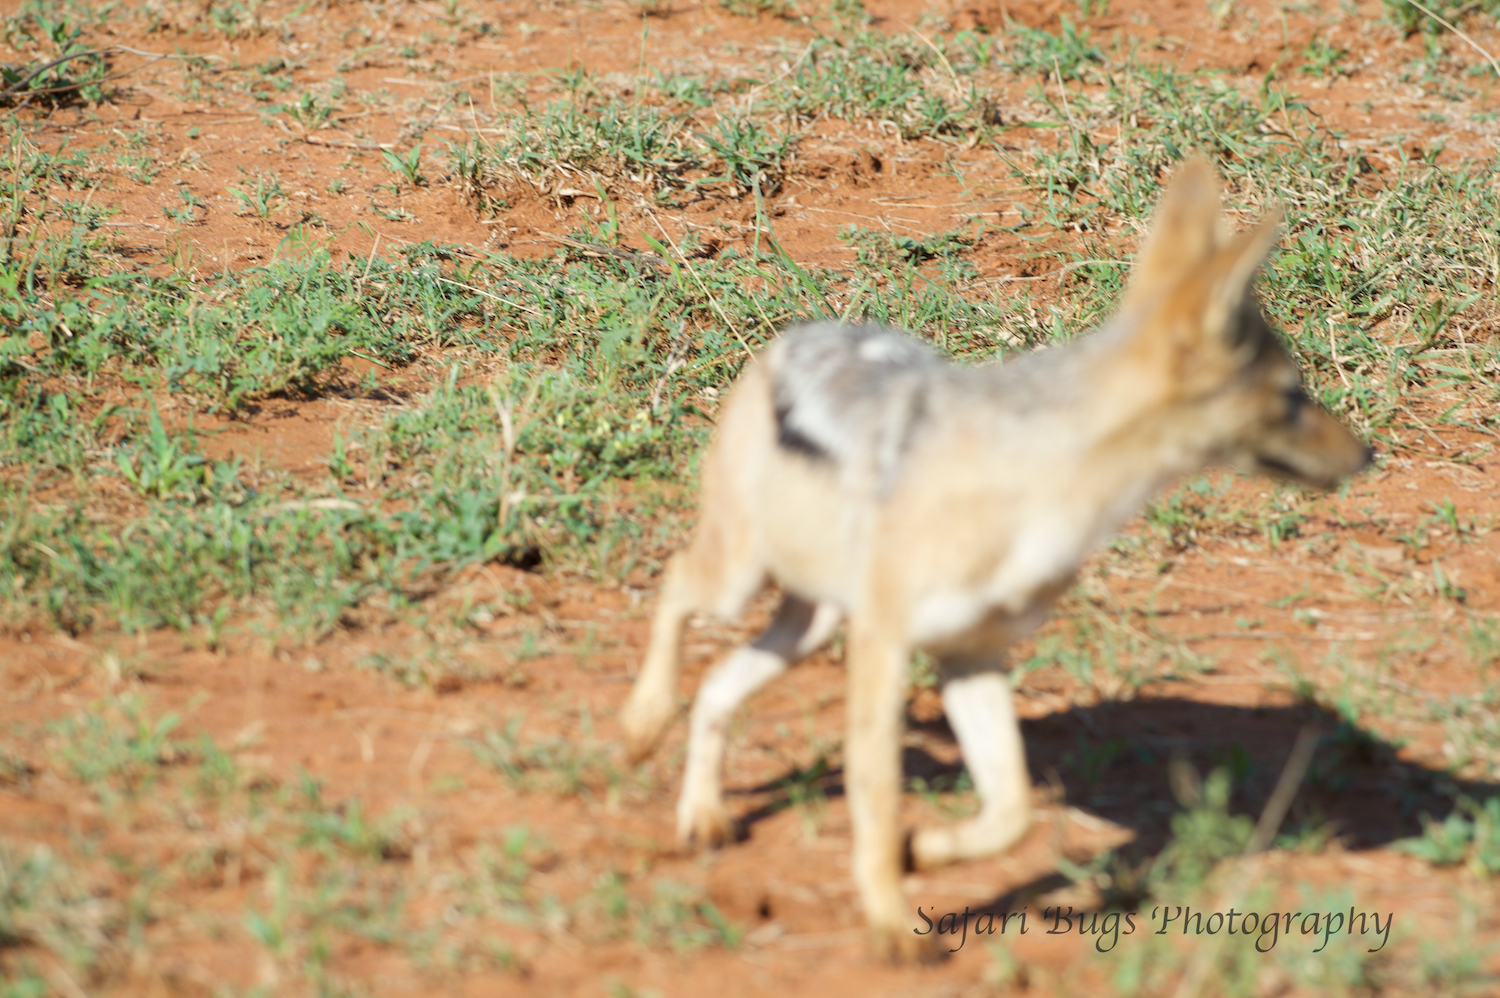  Upon seeing the lionesses on the move, the jackal double backed quite quickly to get the kill which was now unwatched by the lionesses. (not the best photo, but gets the point across) 